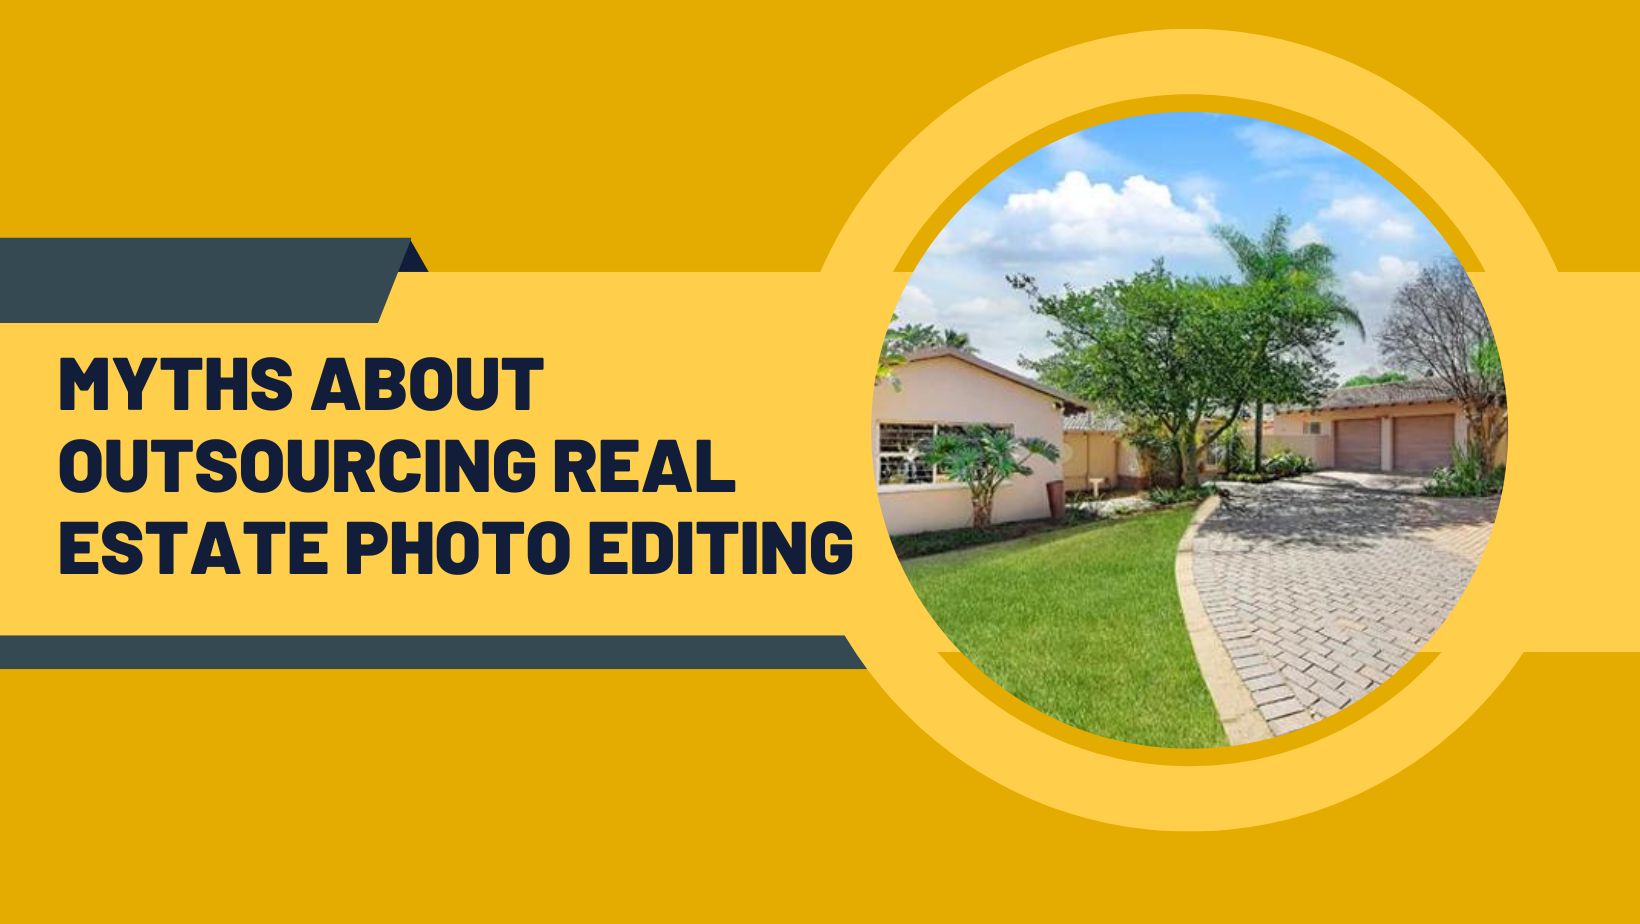 Myths about Outsourcing Real Estate Photo Editing